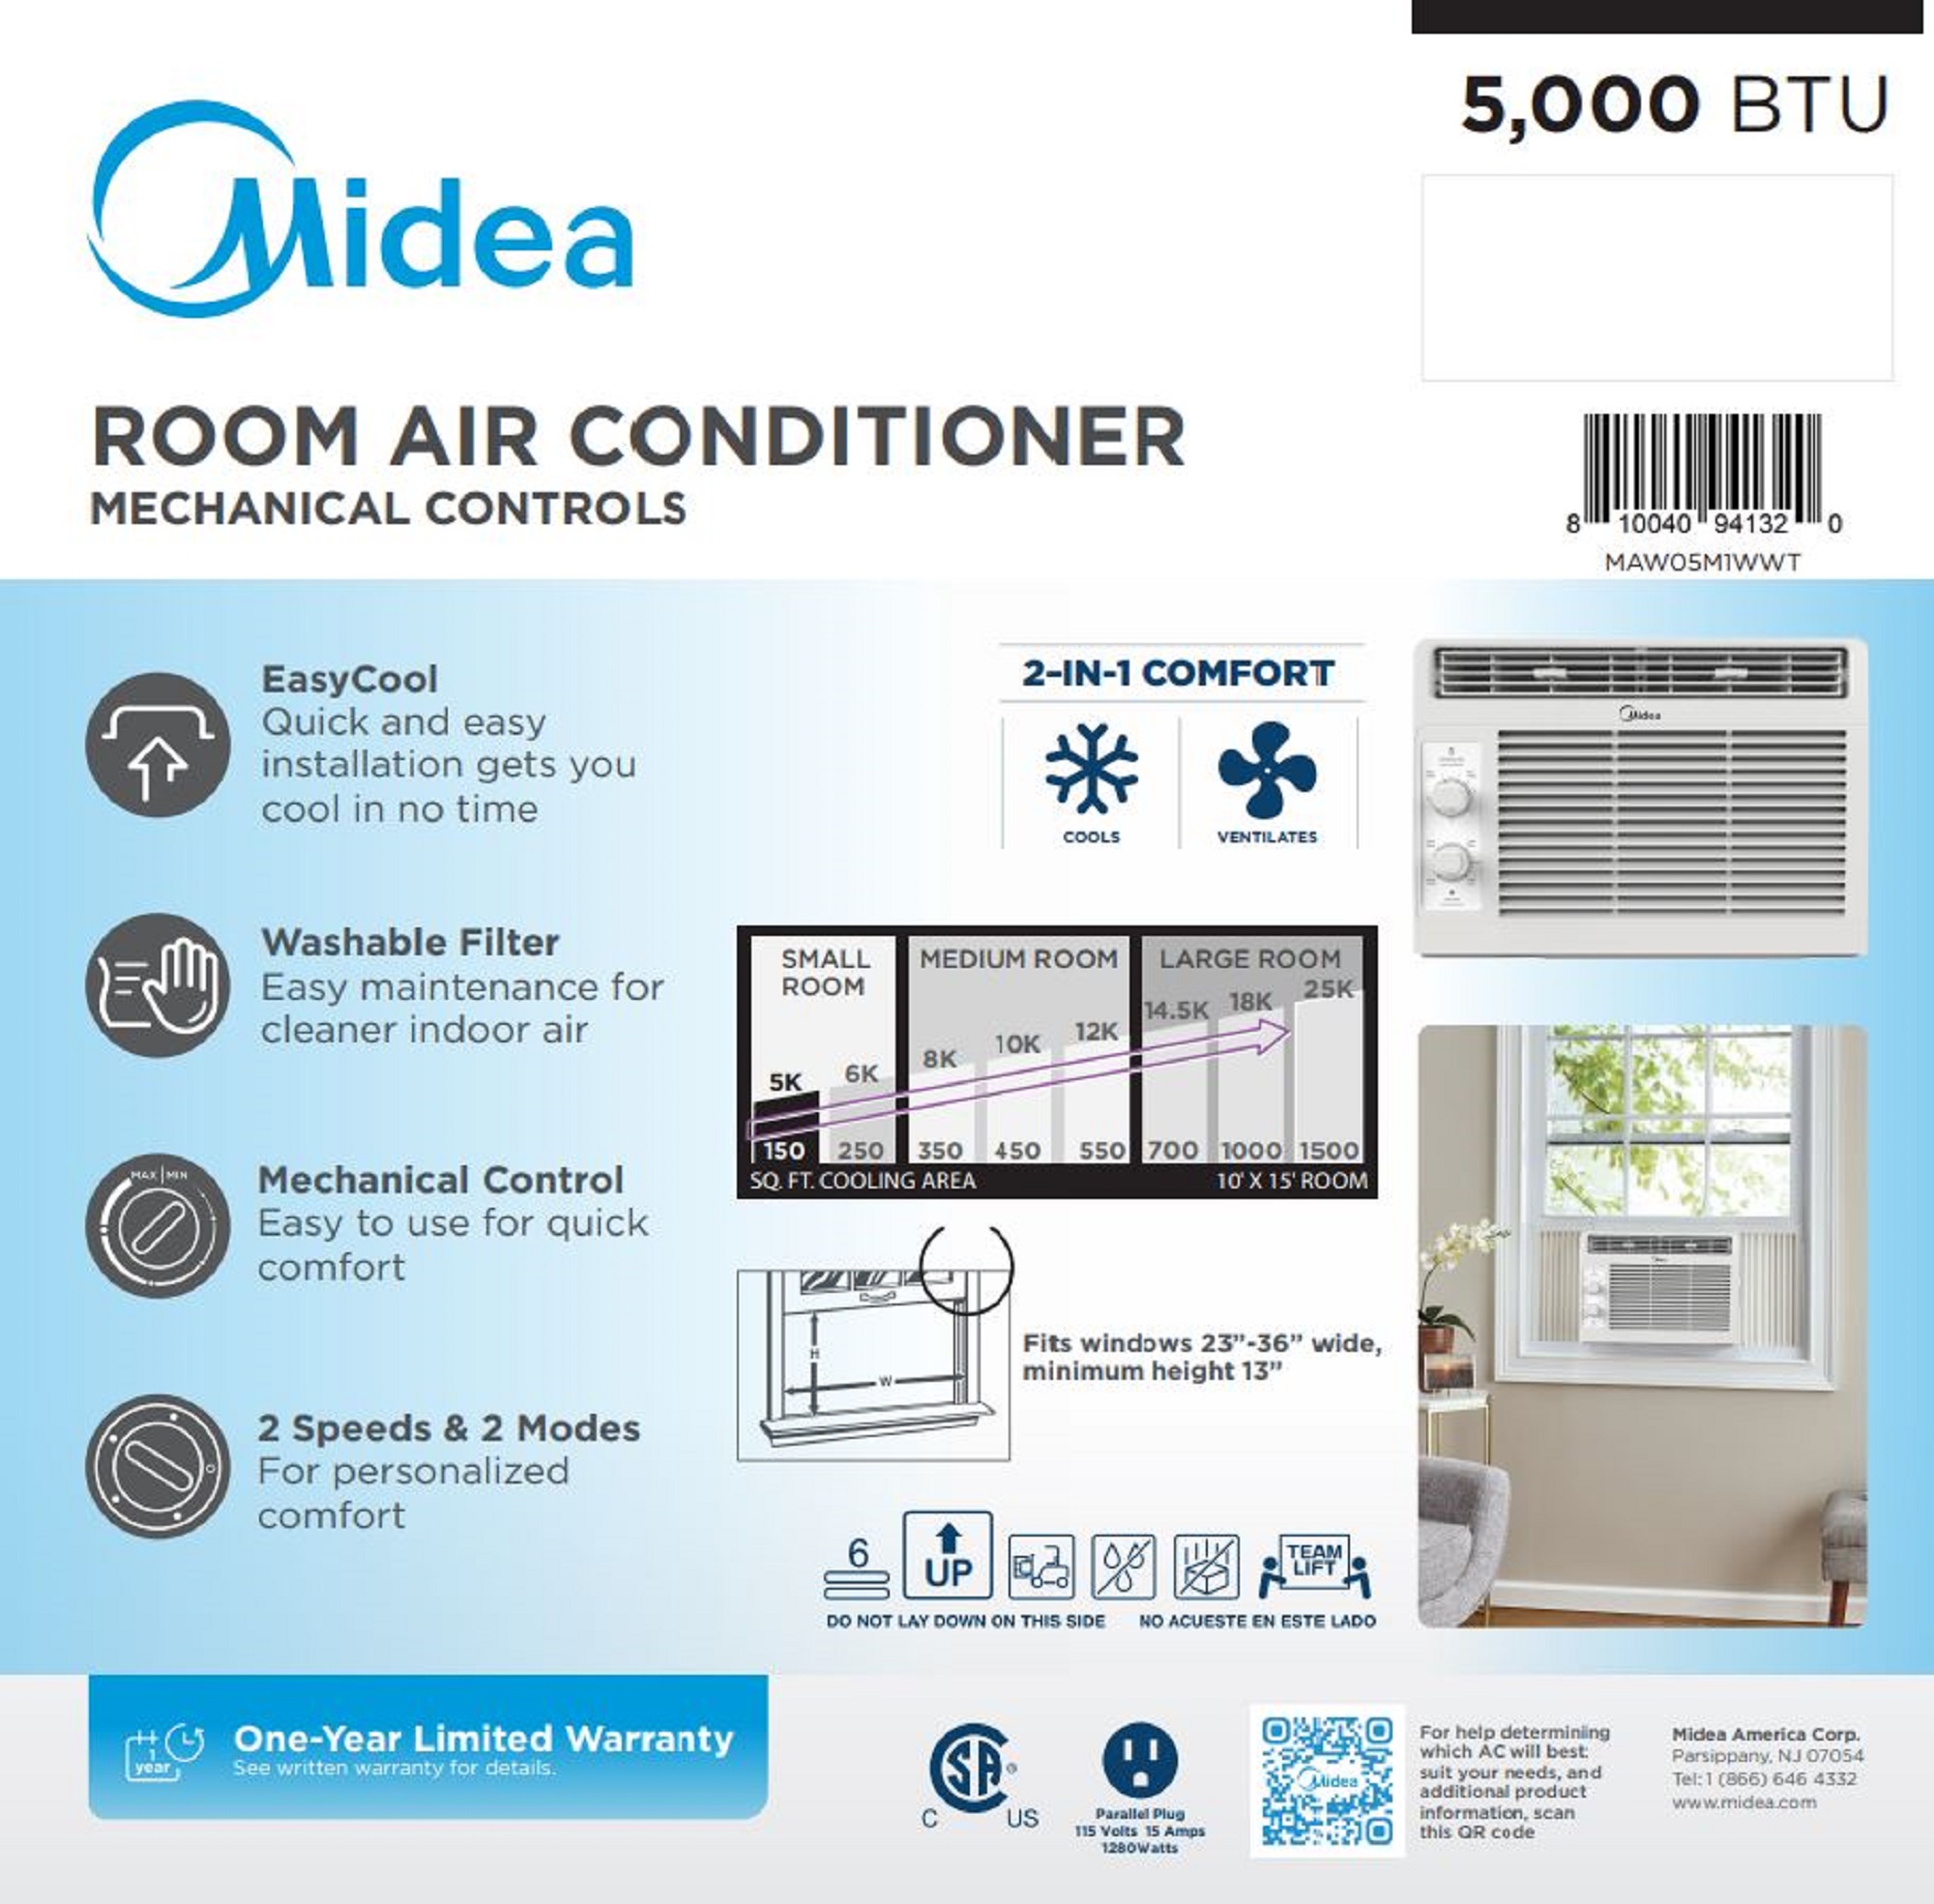 Midea 5,000 BTU 150 Sq Ft Mechanical Window Air Conditioner, White, MAW05M1WWT - image 13 of 17